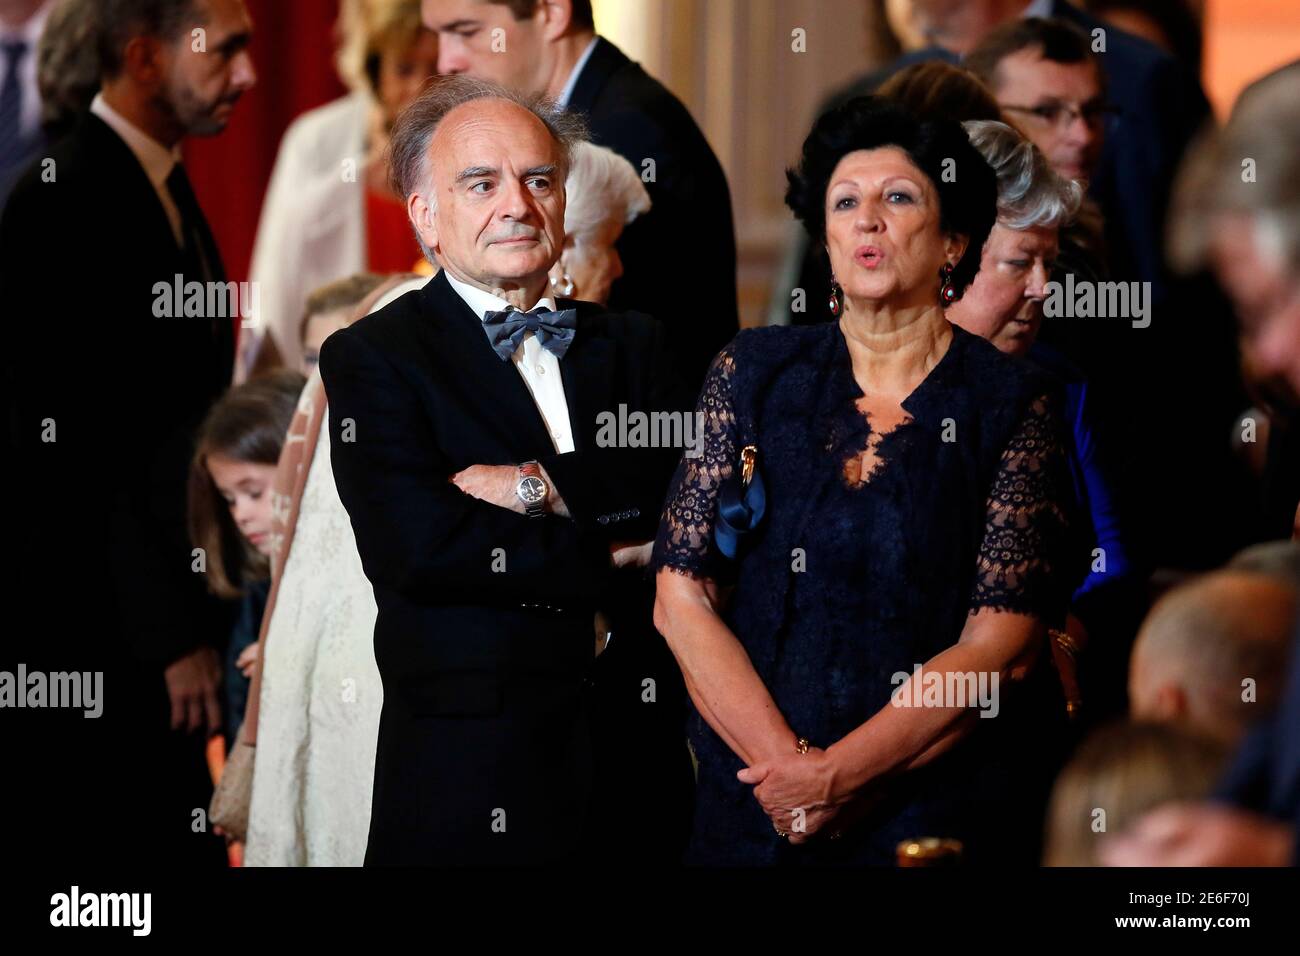 The parents of French President Emmanuel Macron, Jean-Michel Macron (L) and  Françoise Nogues-Macron, listen during his inauguration at the Elysee  Palace in Paris, France, May 14, 2017. REUTERS/Francois Mori/Pool Stock  Photo -